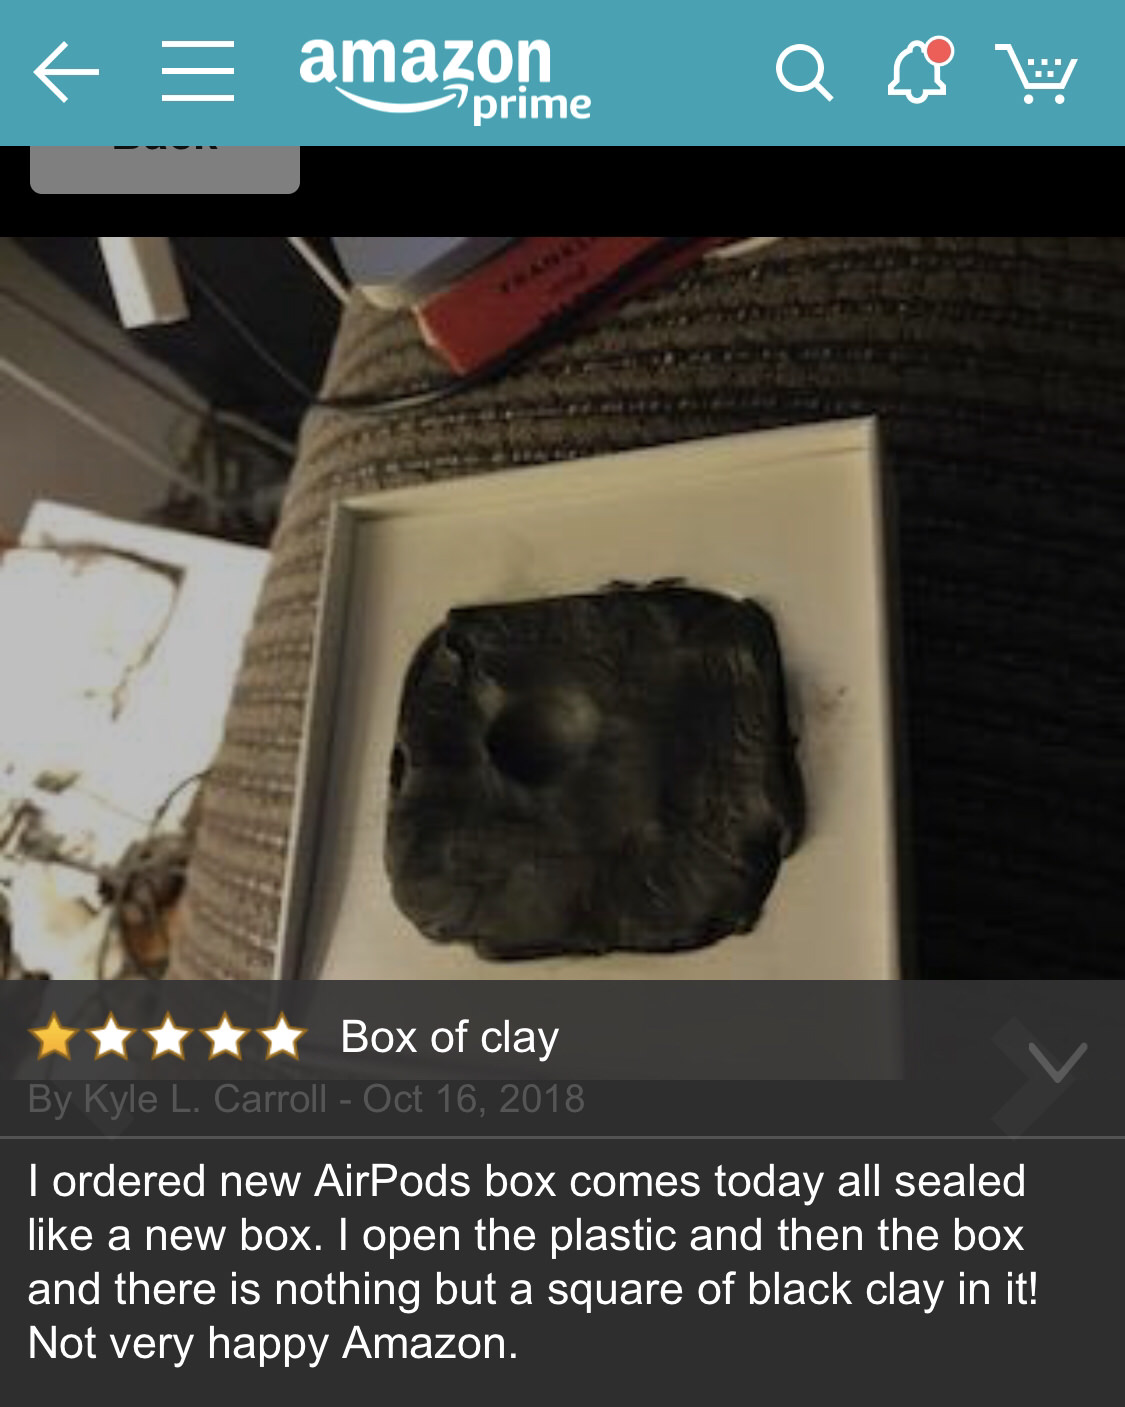 amazon reviews - photo caption - t amazon Qq prime tttBox of clay By Kyle L. Carroll I ordered new AirPods box comes today all sealed a new box. I open the plastic and then the box and there is nothing but a square of black clay in it! Not very happy Amaz